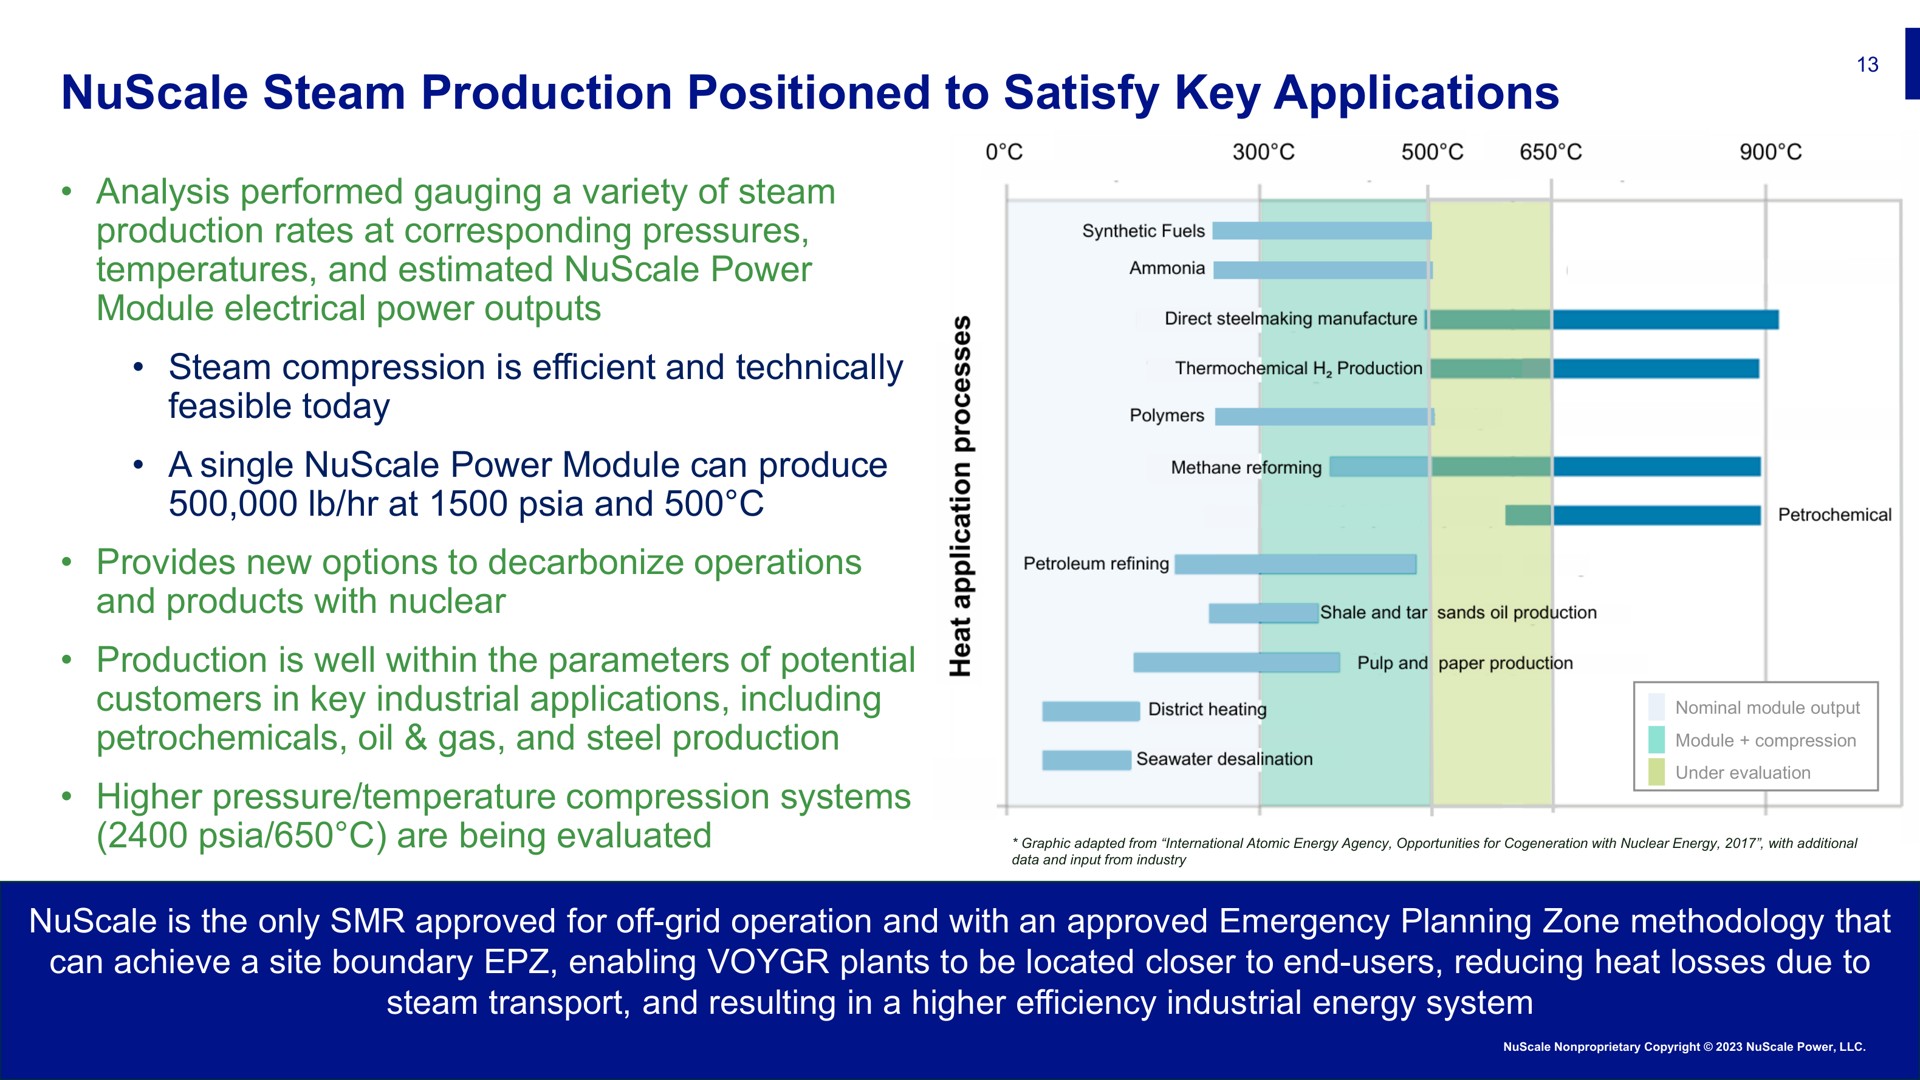 steam production positioned to satisfy key applications | Nuscale